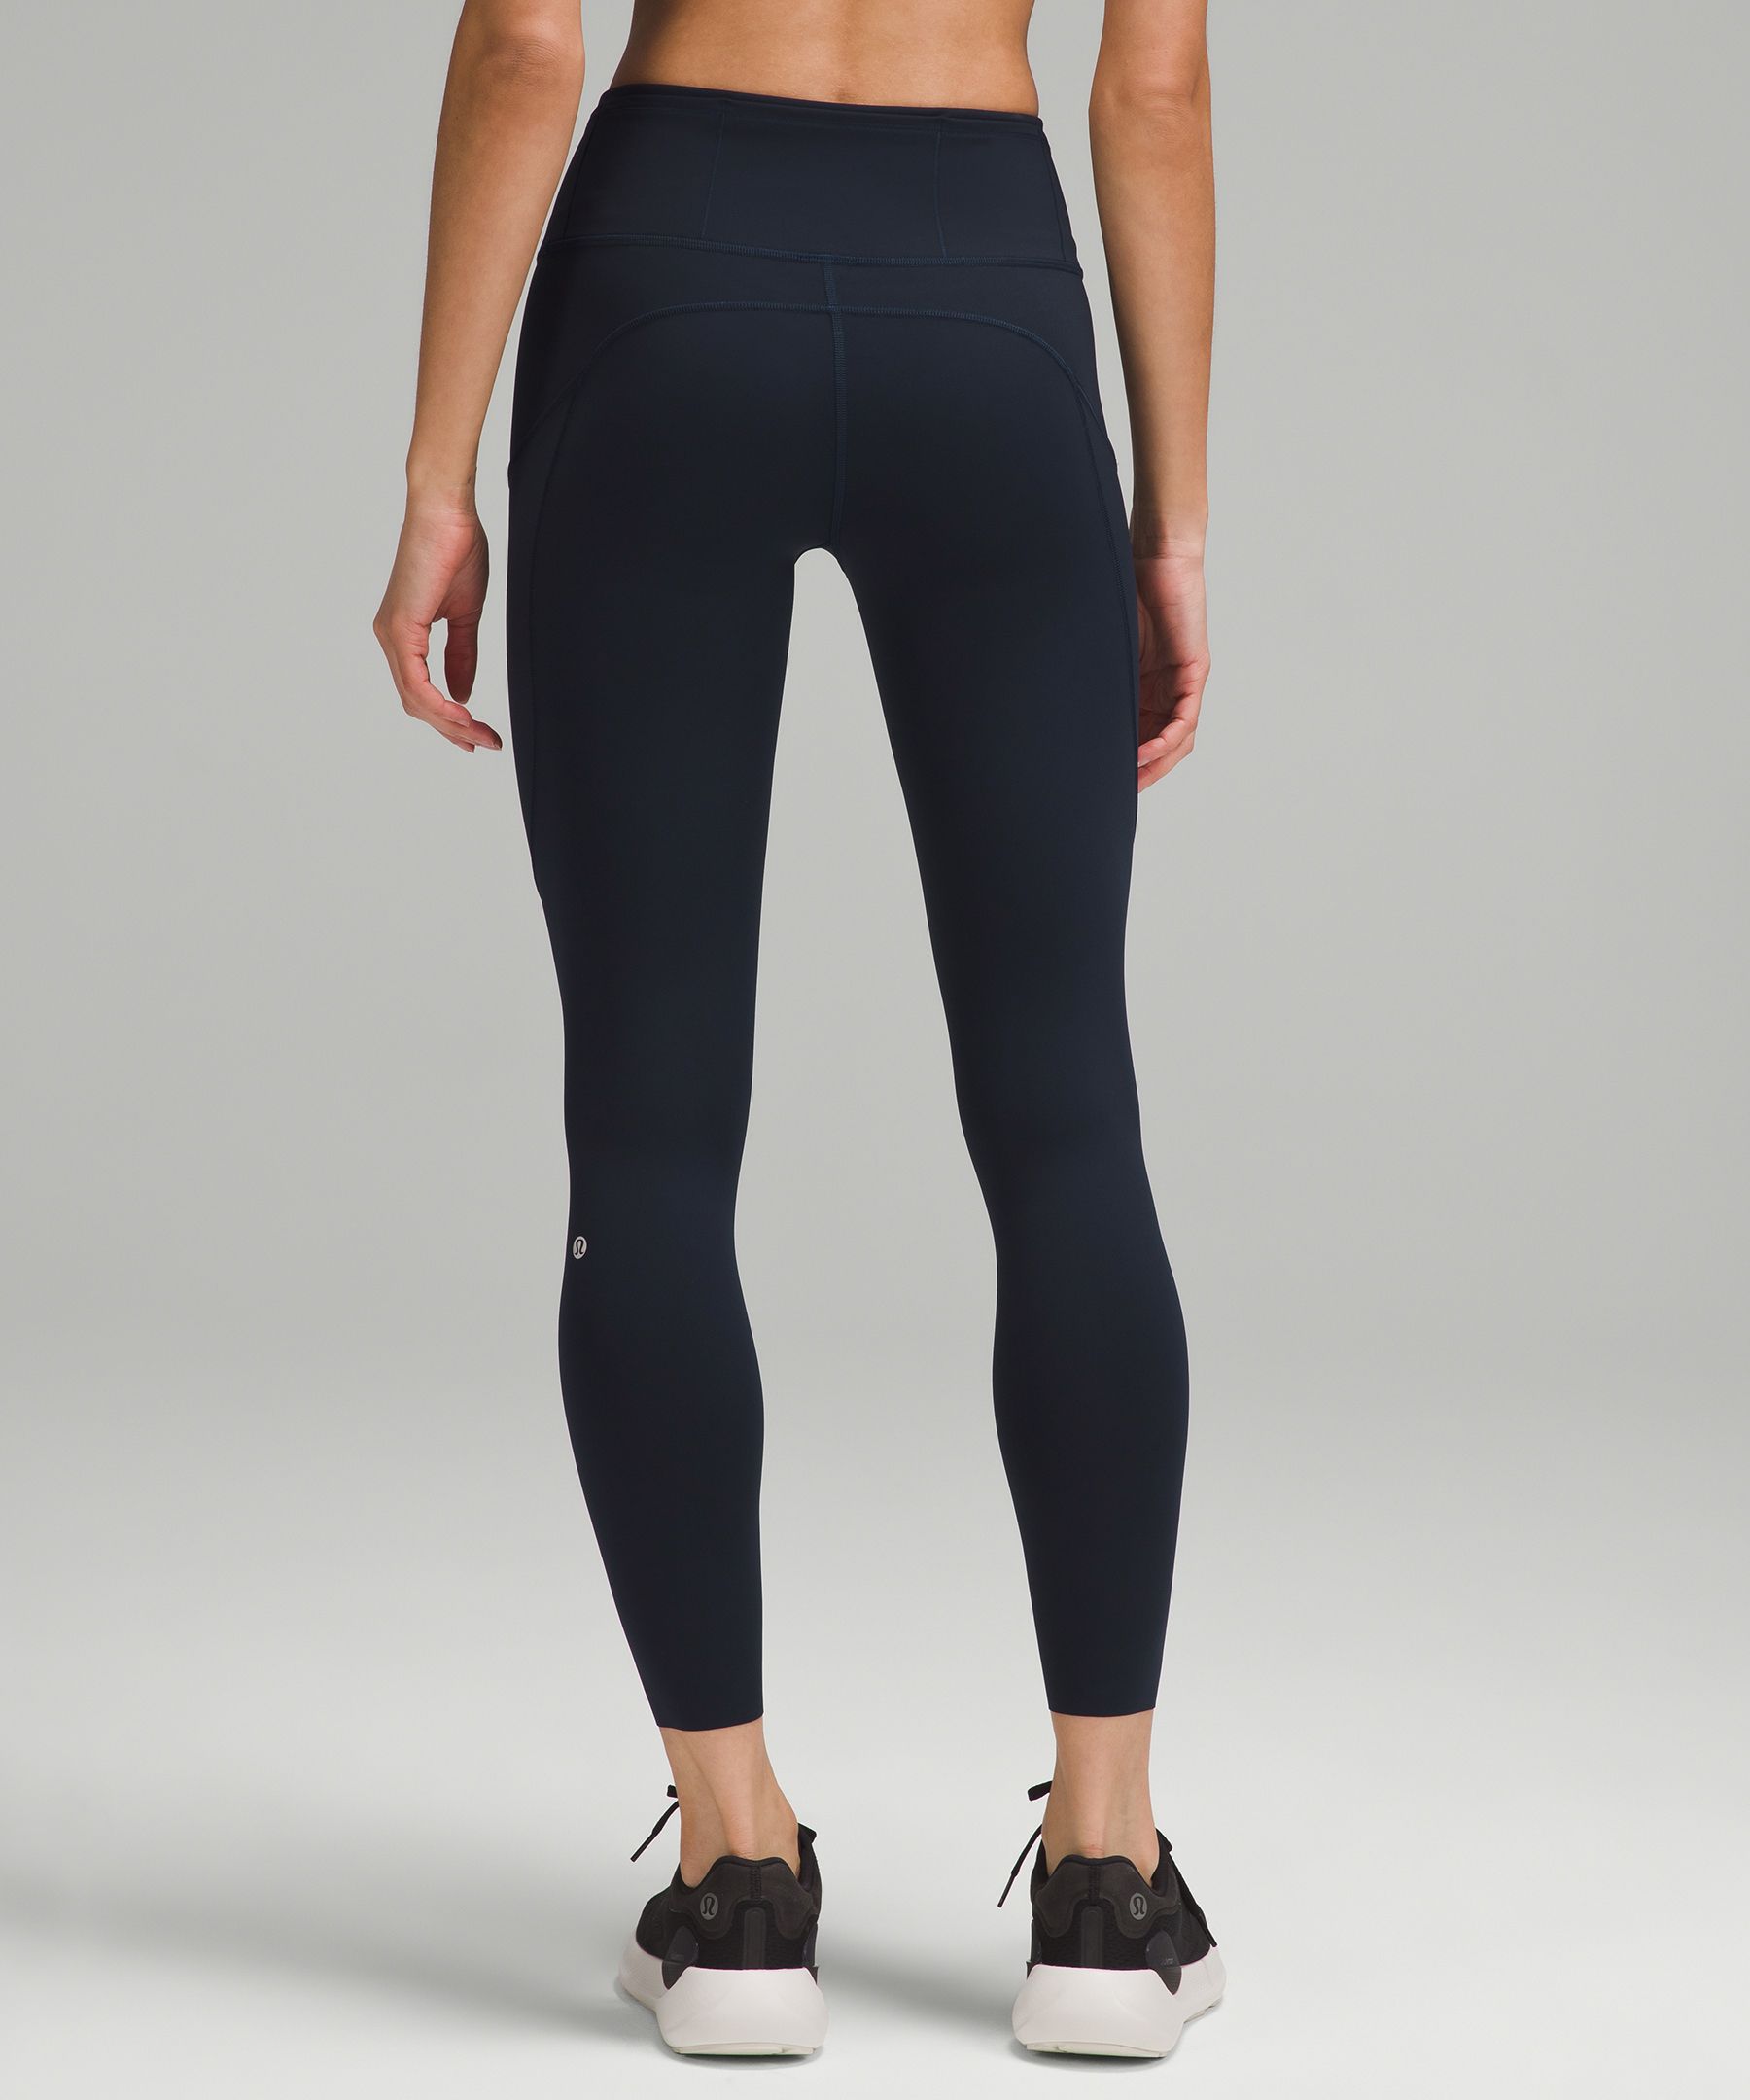 lululemon Fast * Free High-Rise Tight 25 True Navy Size 14 MSRP $128.00  **NWT**